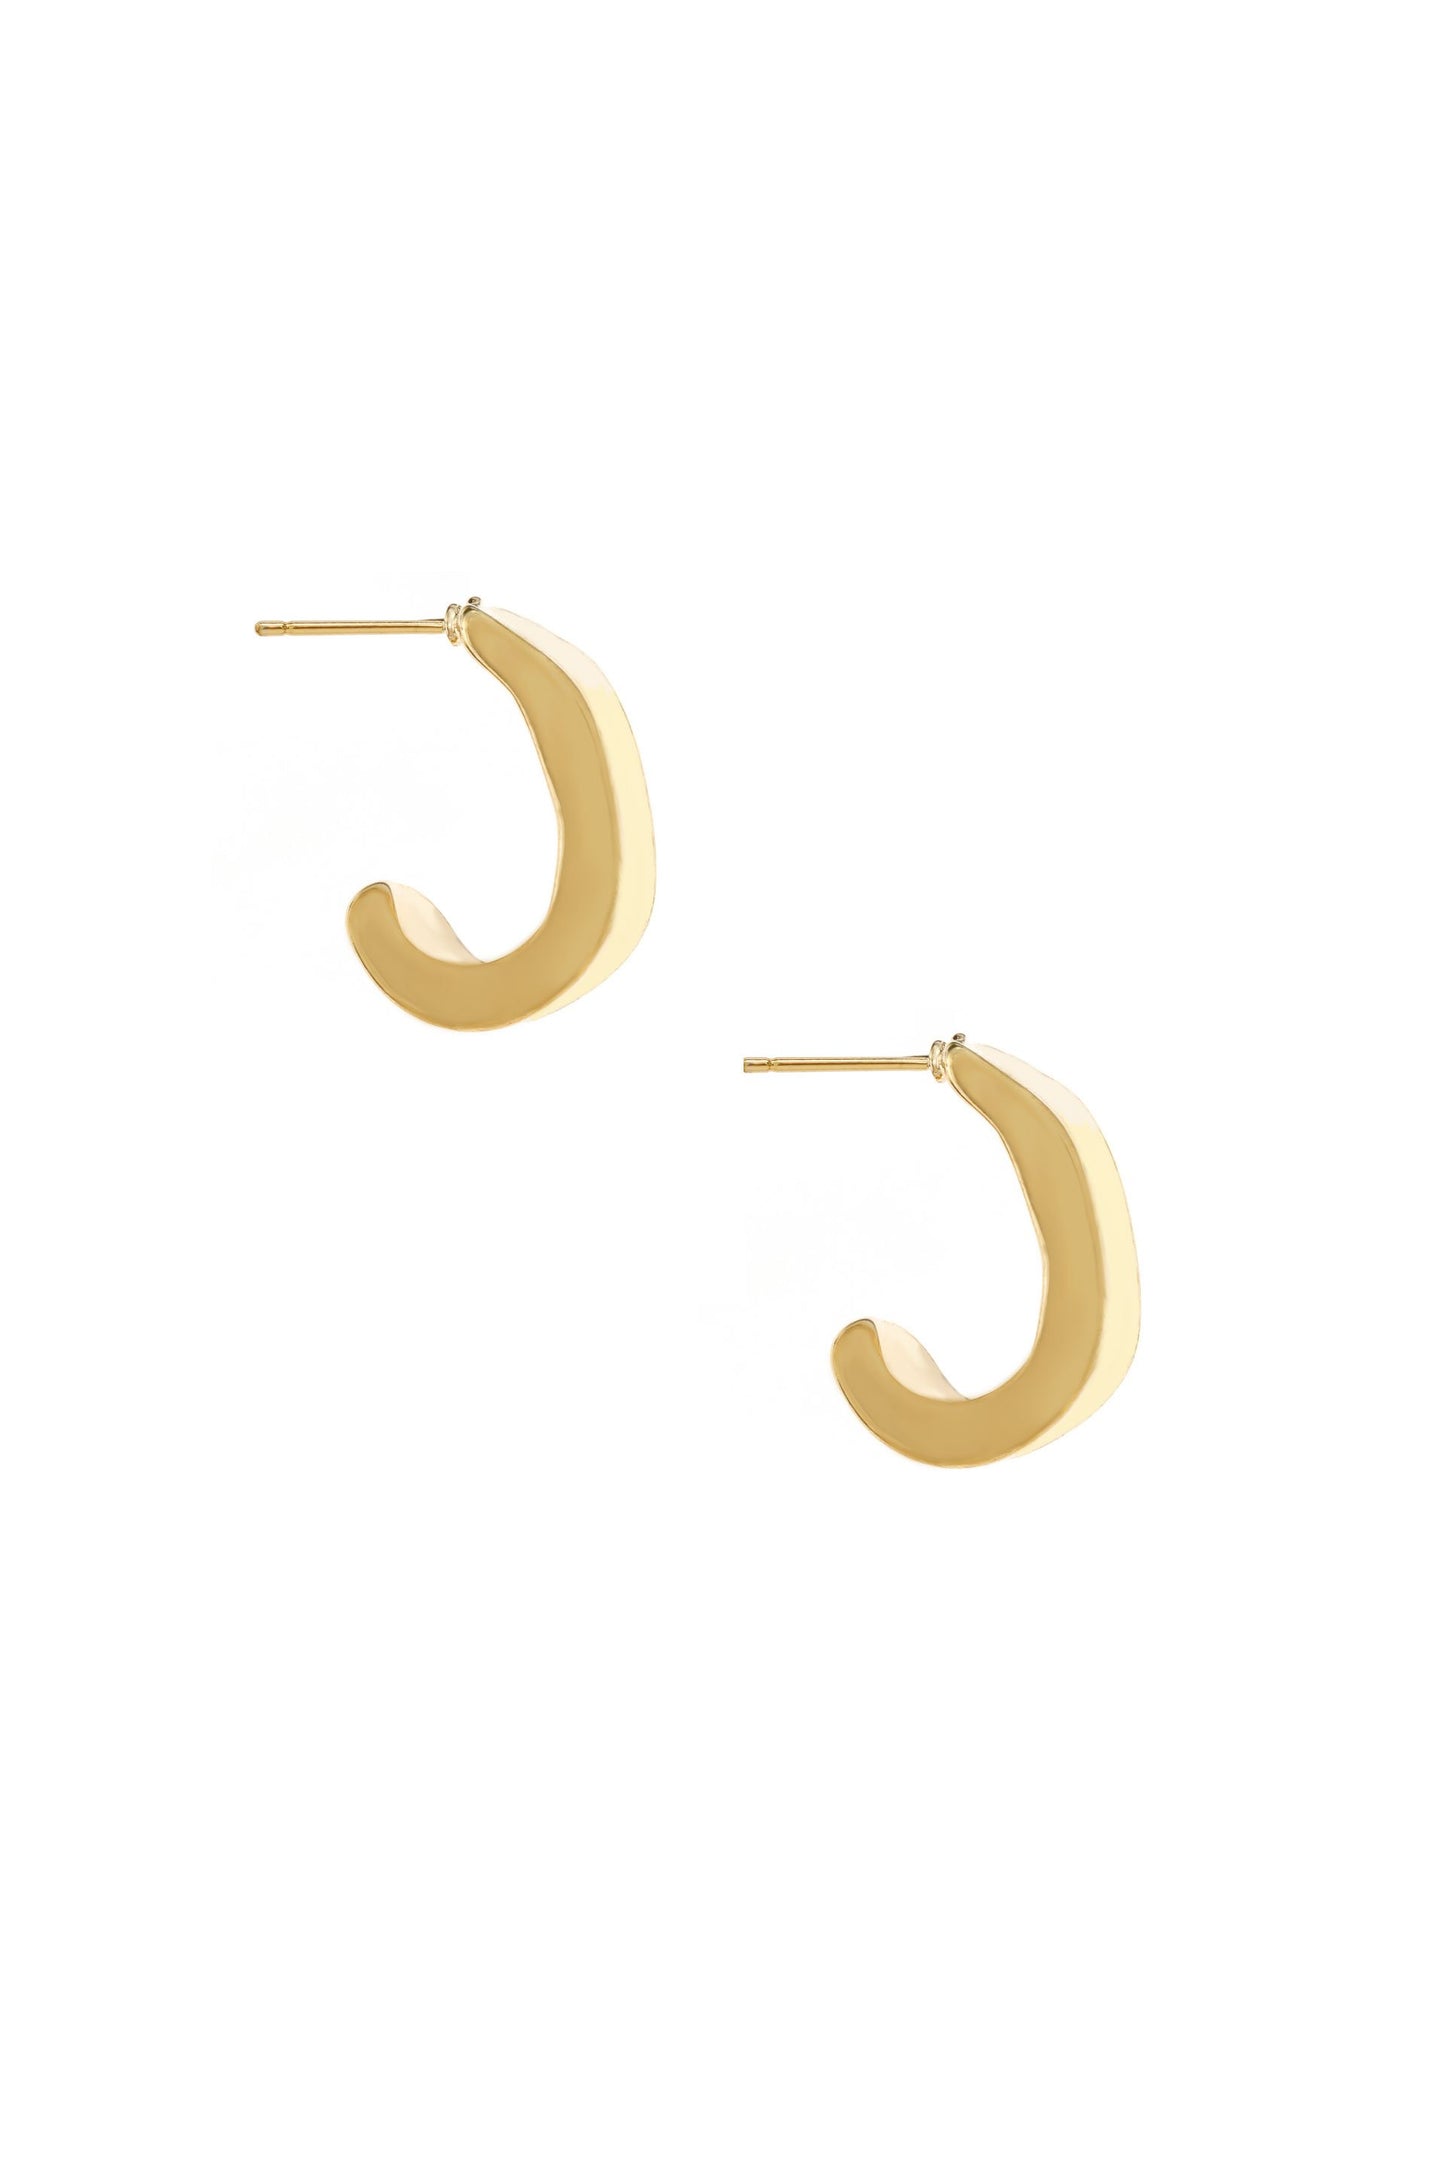 Miss Modern Mini 18k Gold Plated Half Hoops on white background  2